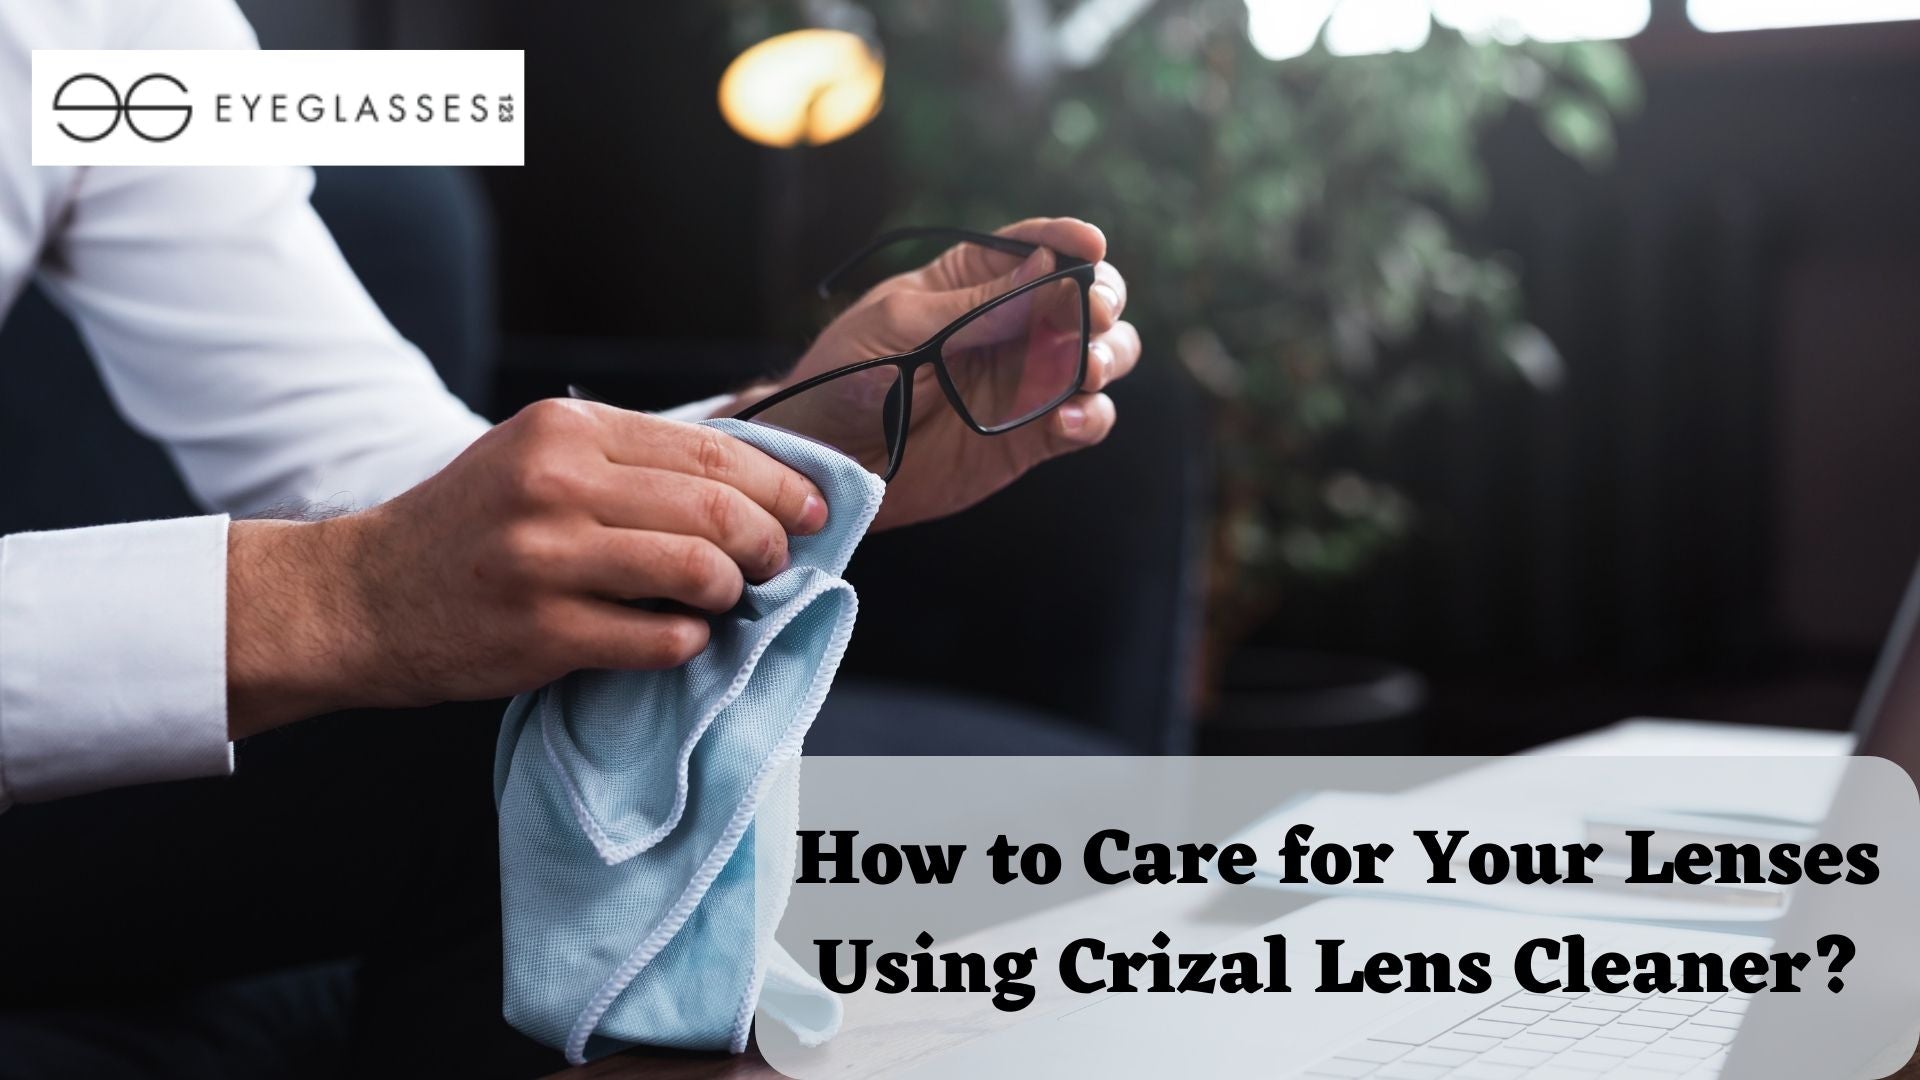 How to Care for Your Lenses Using Crizal Lens Cleaner?